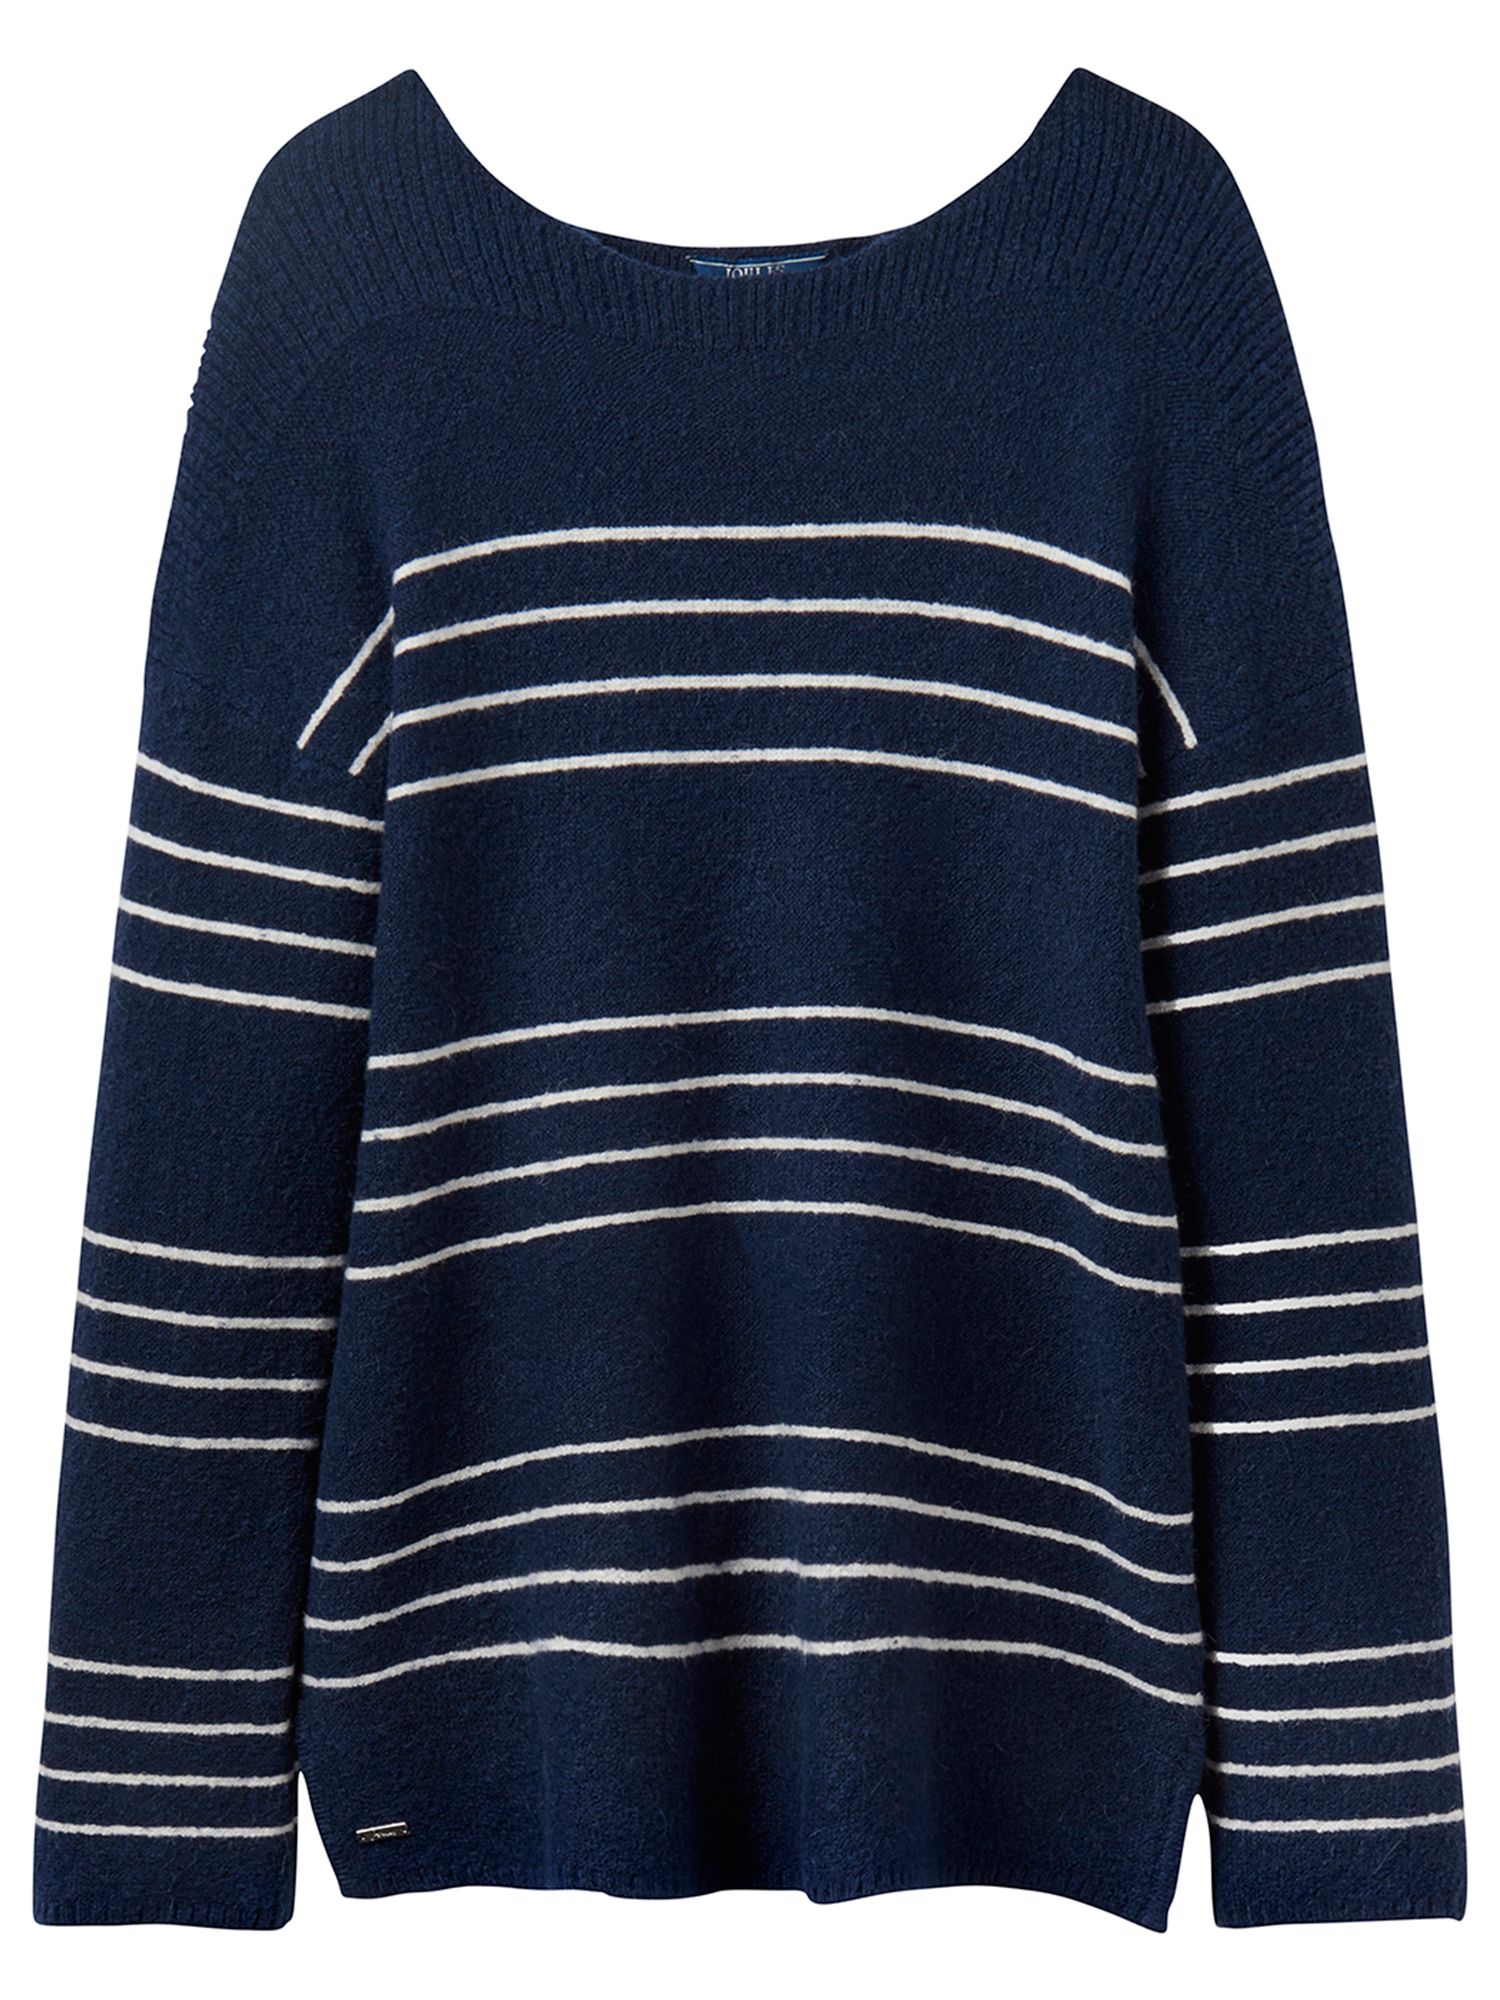 Joules Rowena Stripe Jumper, French Navy at John Lewis & Partners